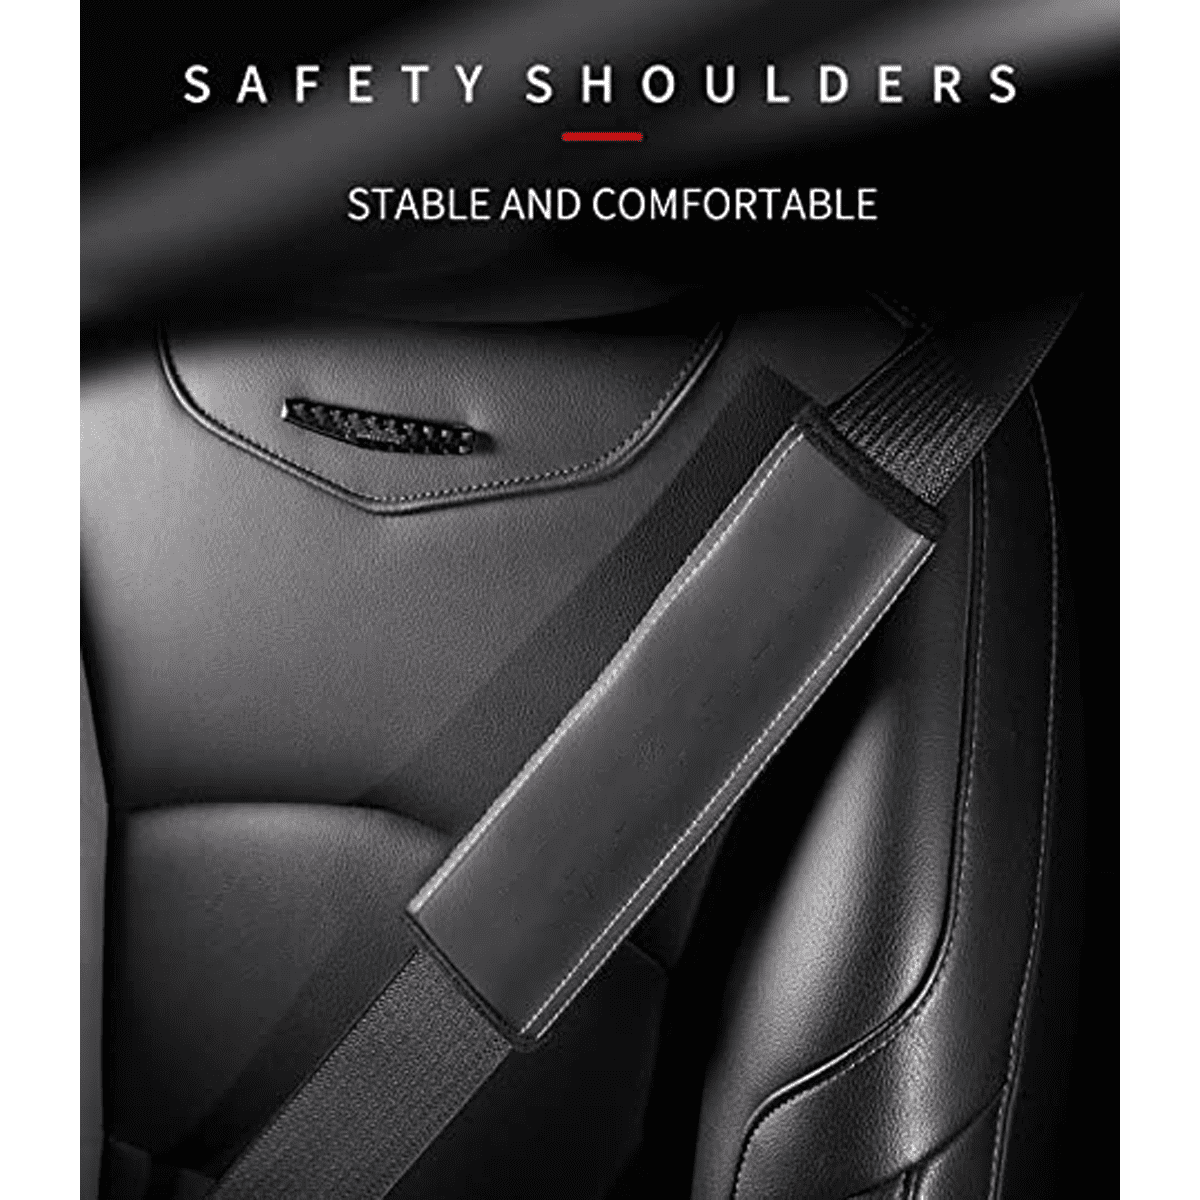 Custom Text and Logo Seat Belt Covers, Fit with Jaguar, Microfiber Leather Seat Belt Shoulder Pads for More Comfortable Driving, Set of 2pcs - Delicate Leather